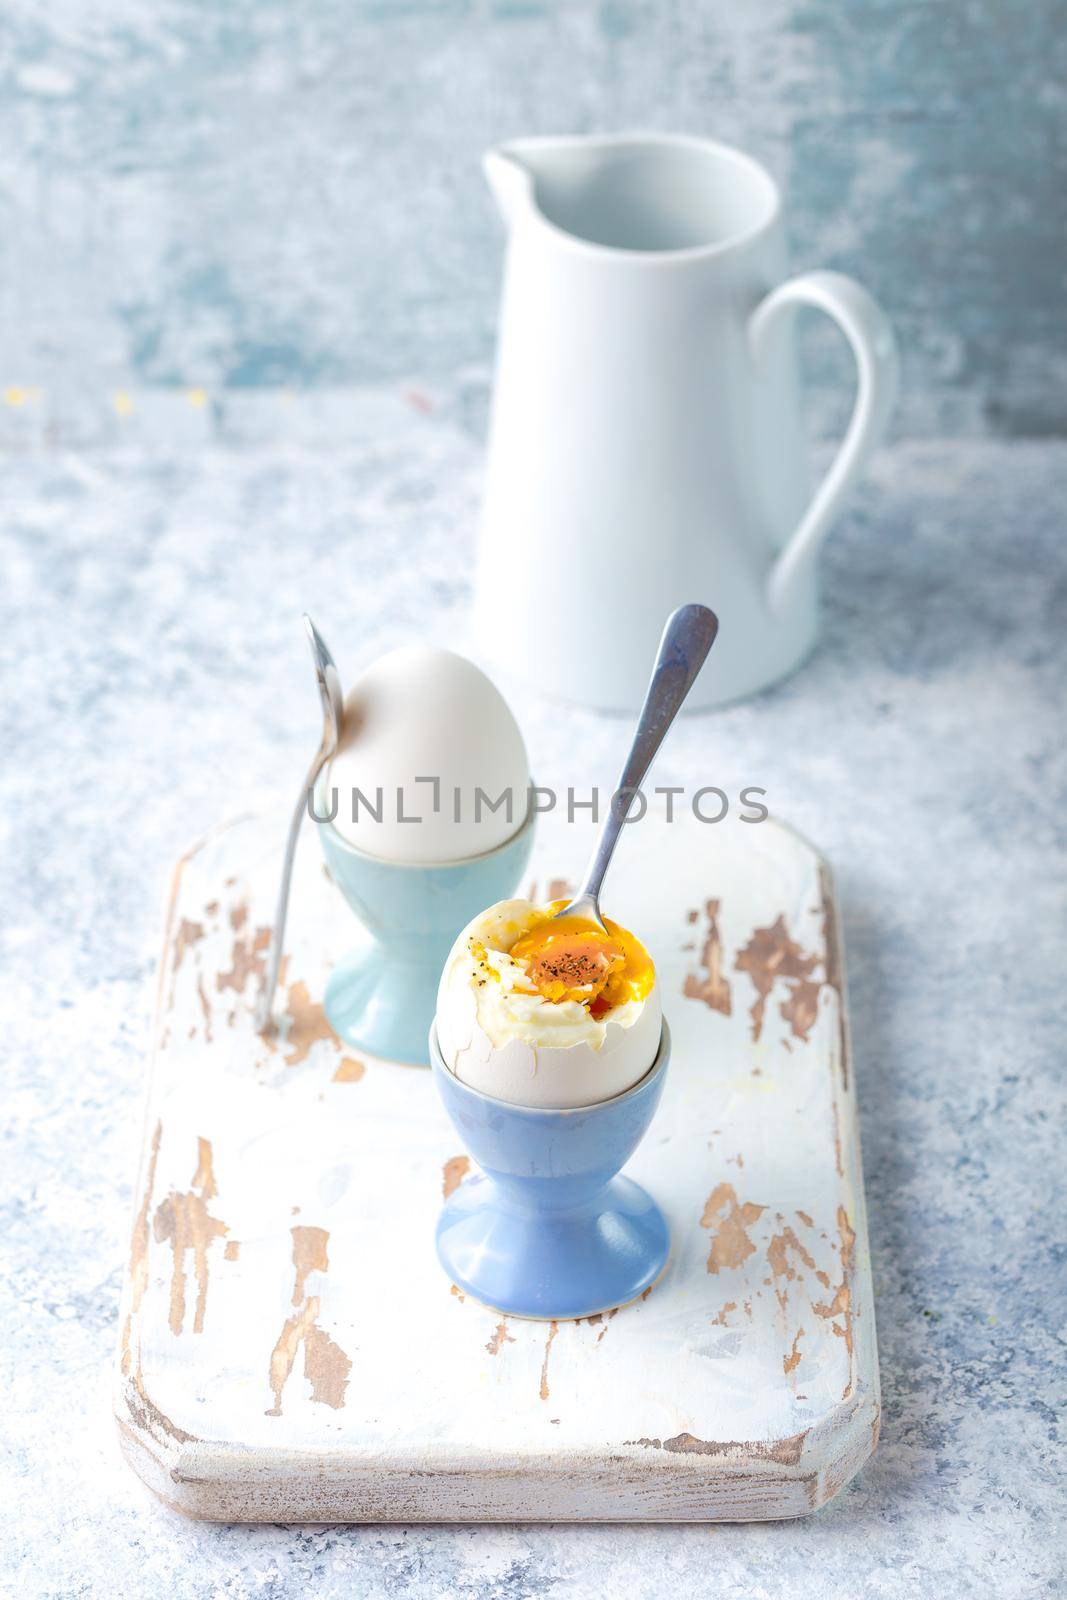 Fresh soft boiled eggs in stands, spoons, white wooden cooking board, white concrete rustic background. Soft eggs for healthy breakfast. Jar with milk. Selective focus. Egg protein fitness breakfast